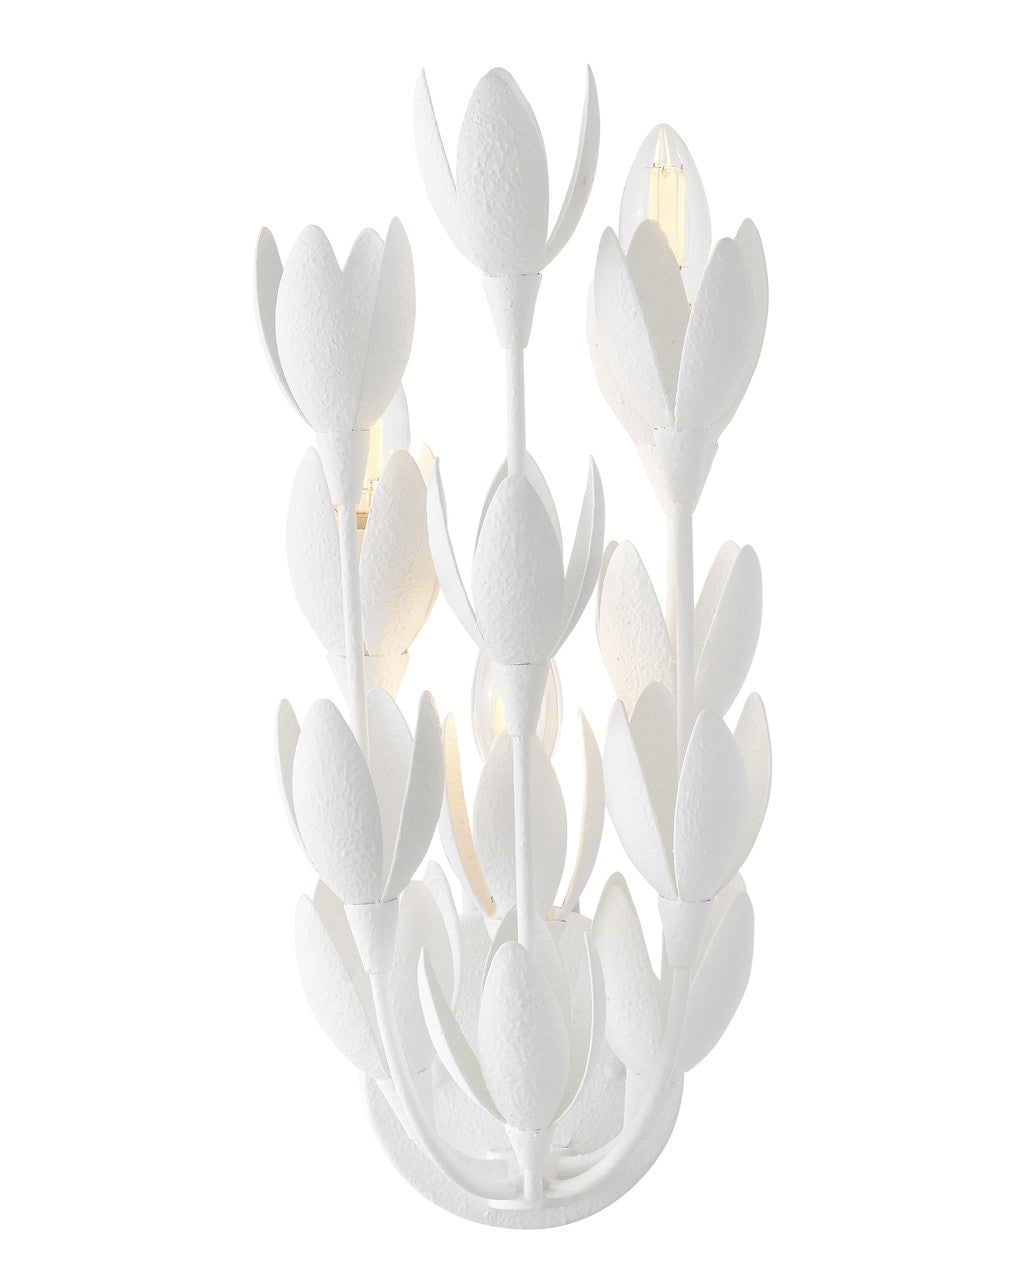 Hinkley - 30010TXP - LED Wall Sconce - Flora - Textured Plaster